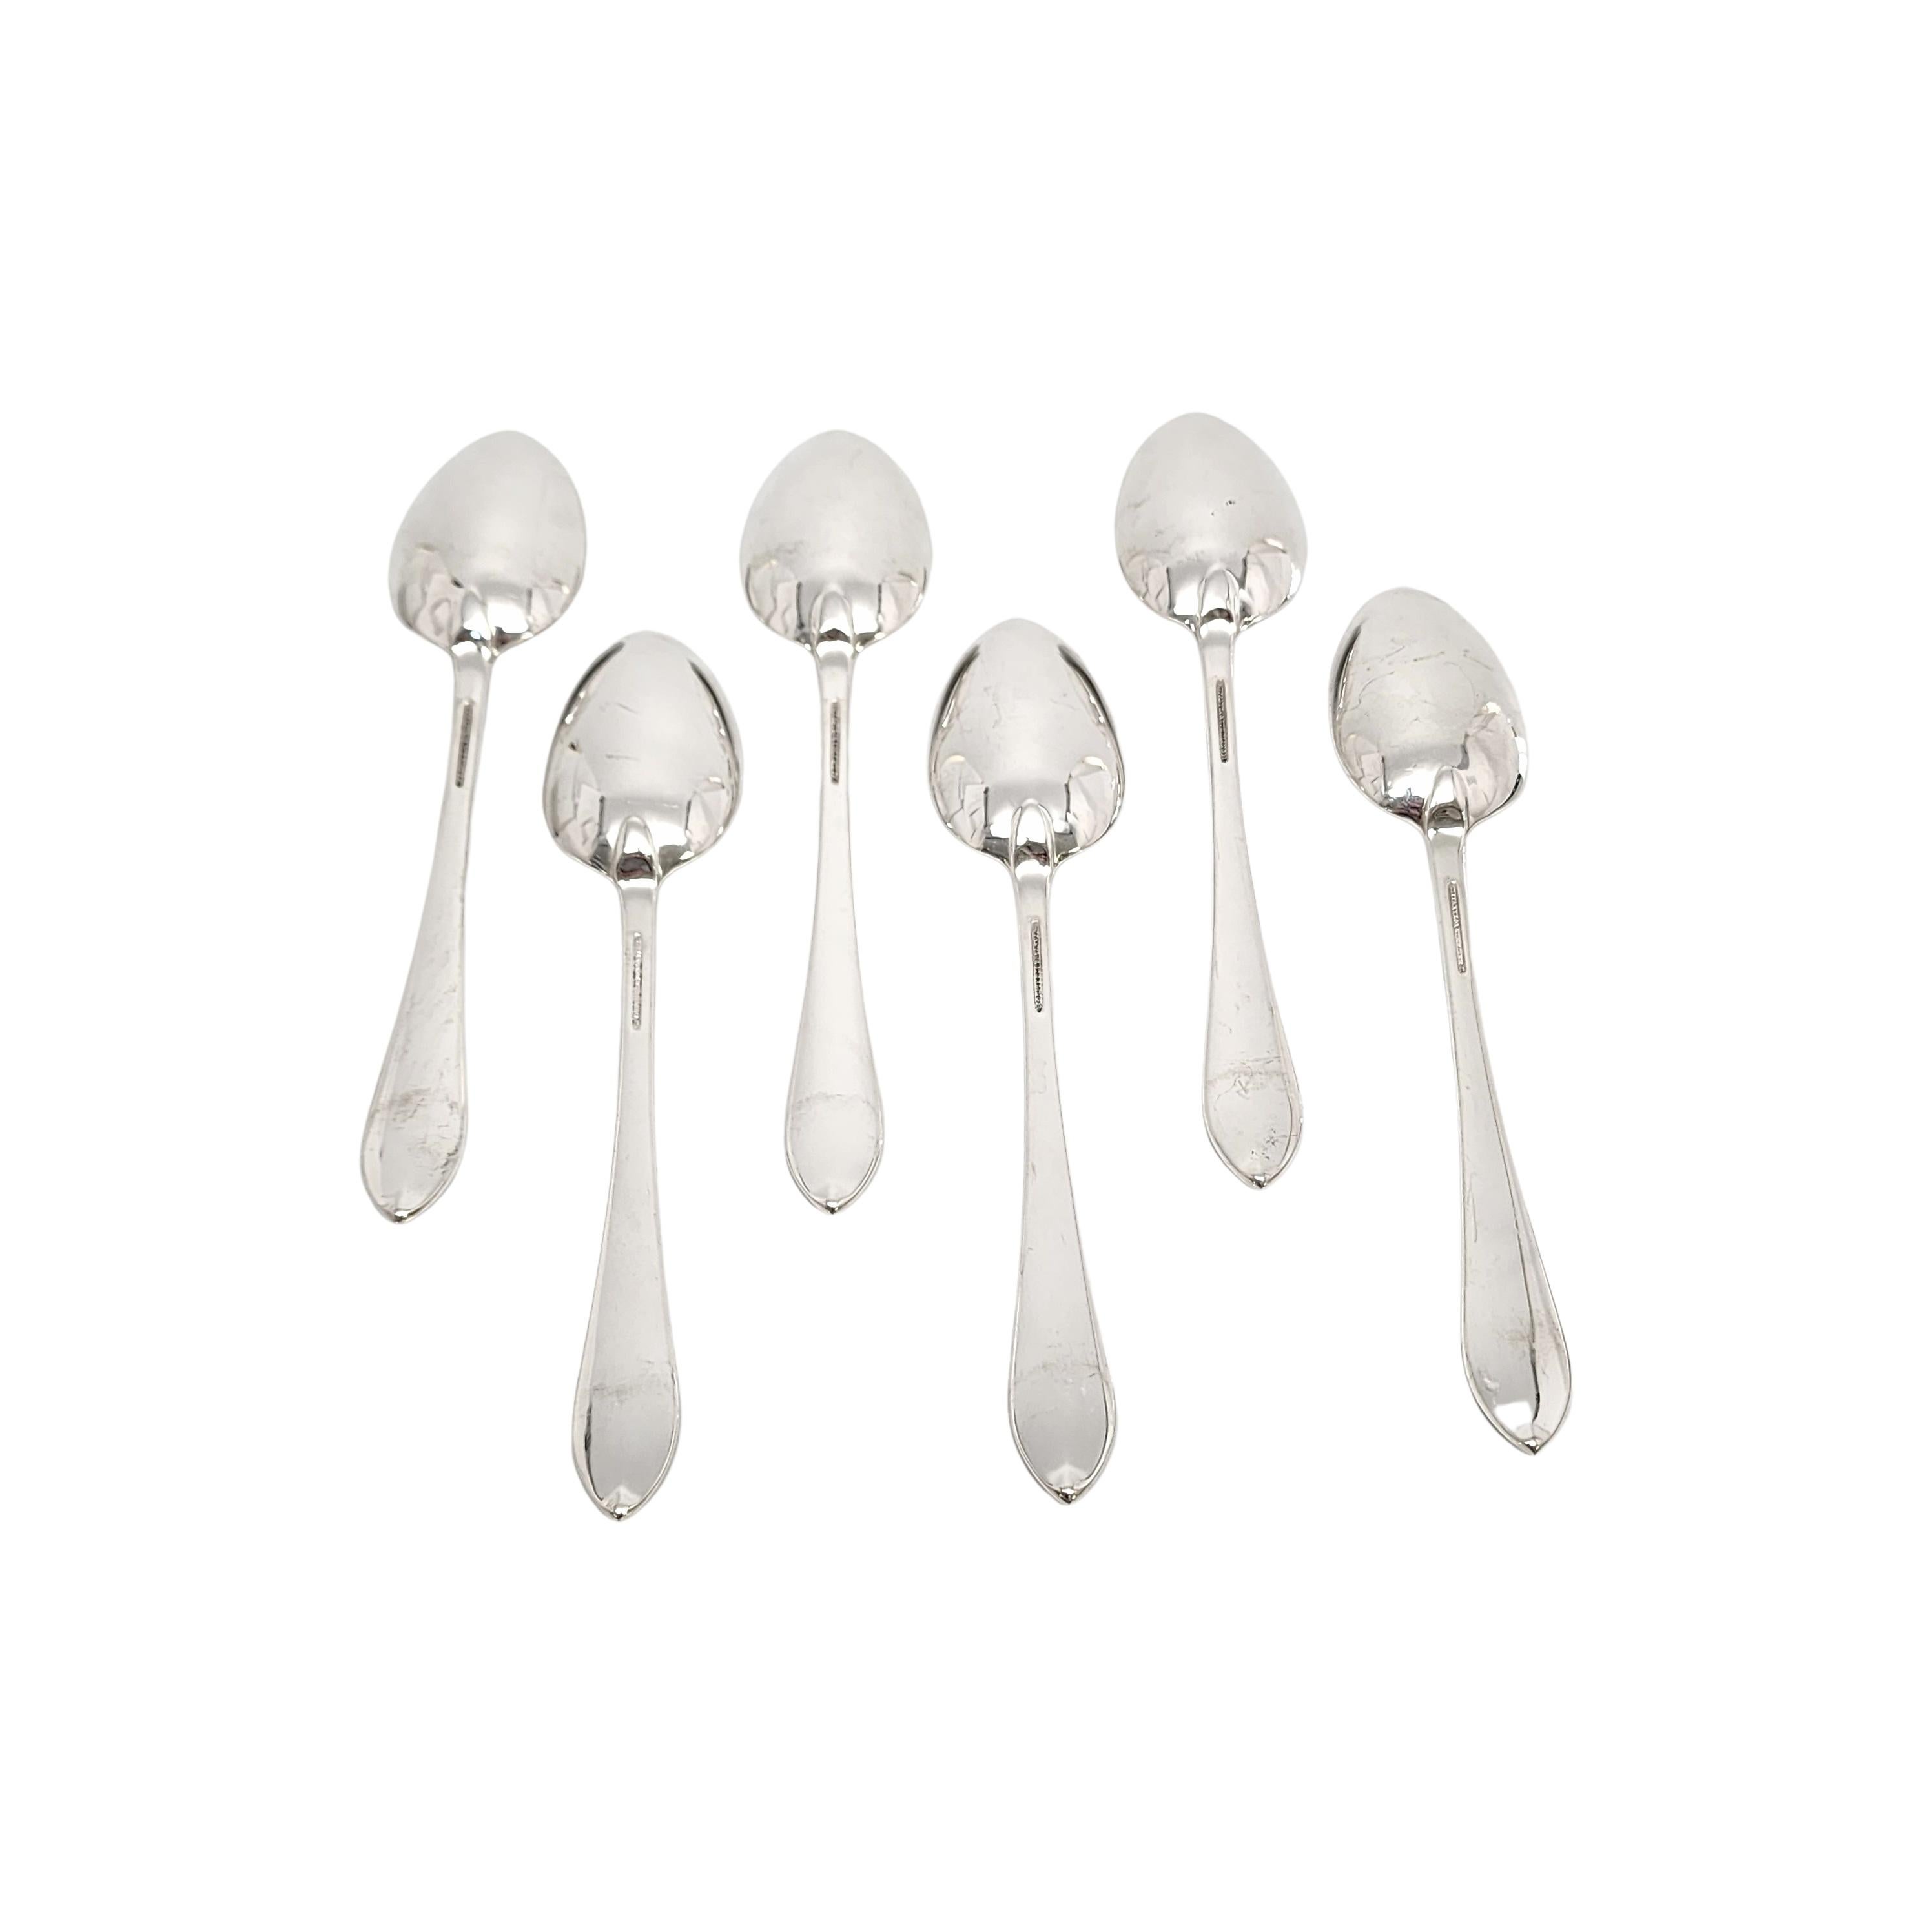 Set of 6 Tiffany & Co Sterling Silver Faneuil Fruit/Orange Spoons In Good Condition For Sale In Washington Depot, CT